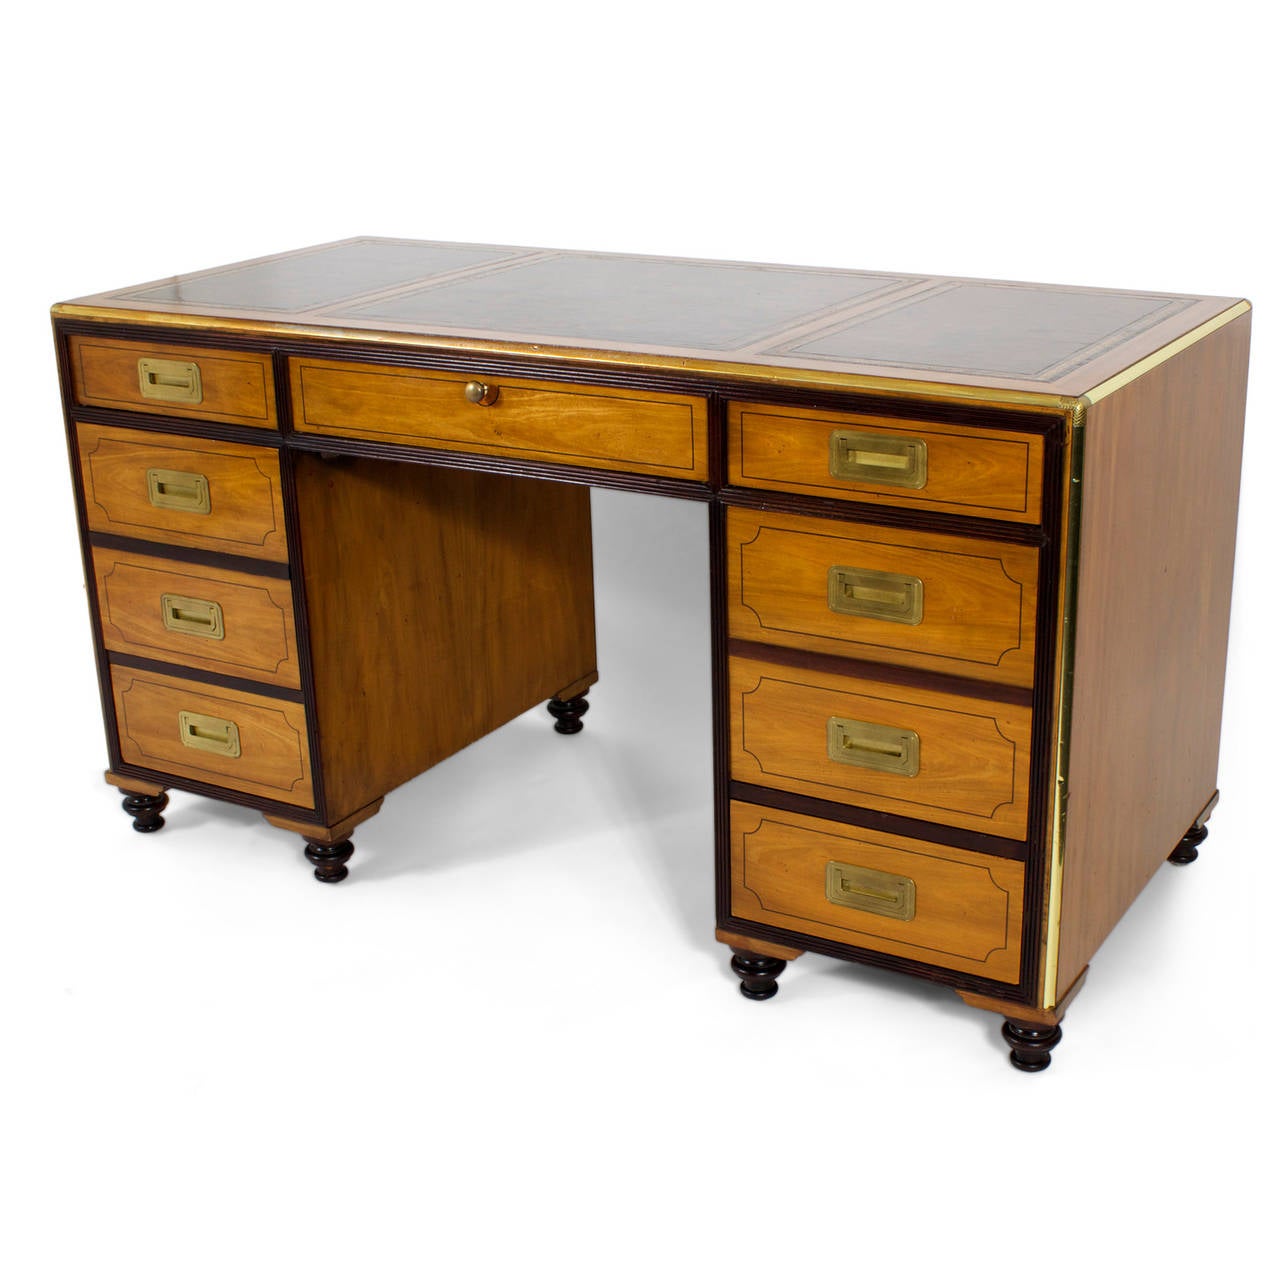 A brass labeled Baker collectors edition Campaign style desk in two-tone mahogany, with turned feet, brass trim and recessed hardware, three panel tooled leather top, reeded banding surrounds the drawer fronts. The other side of the desk, designed